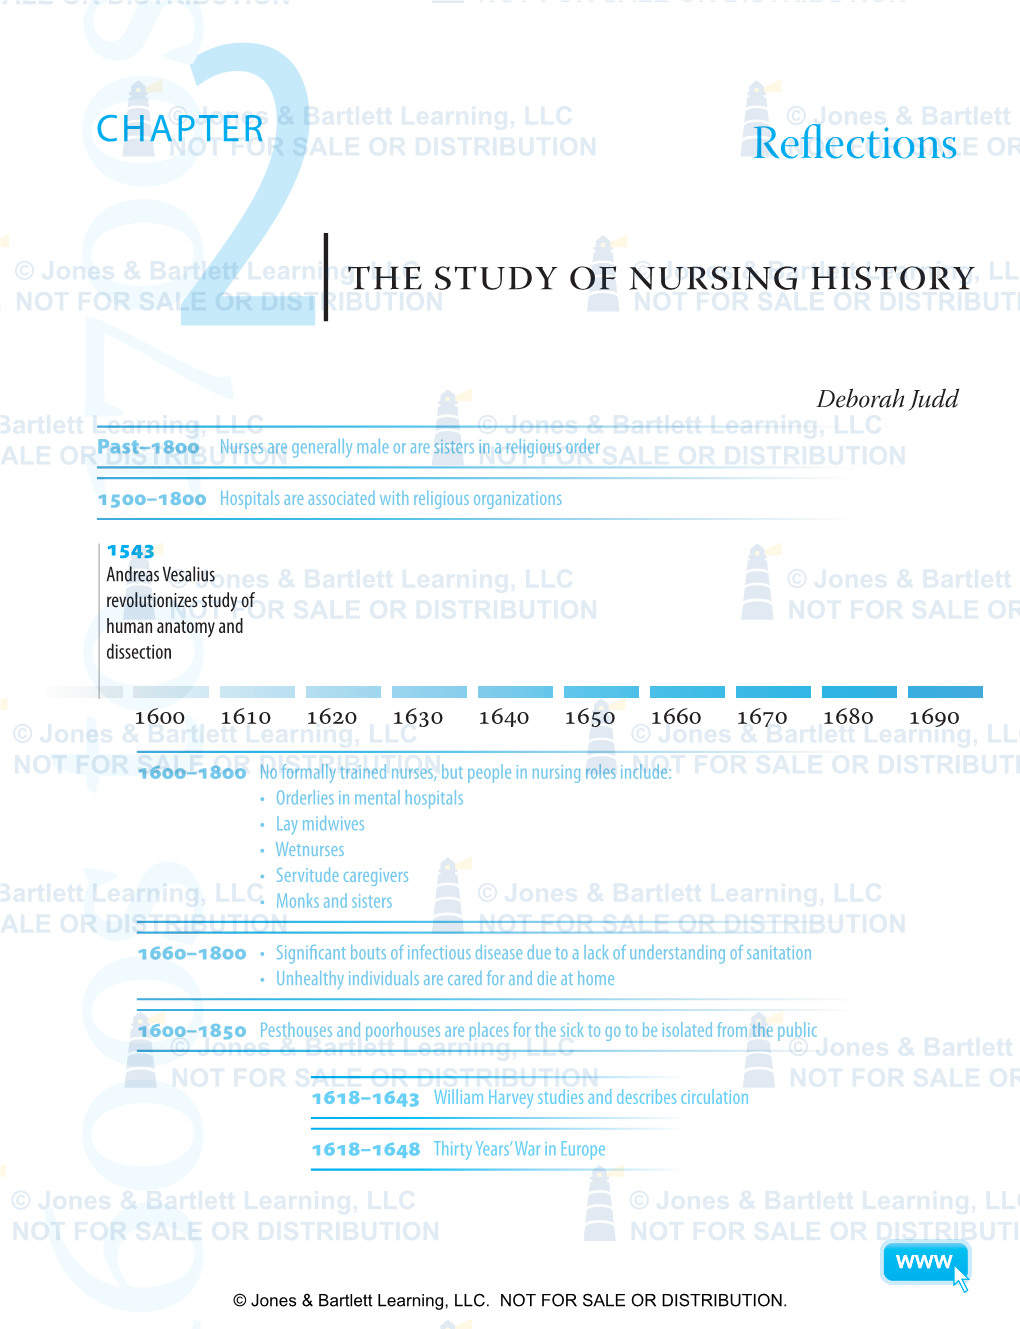 The Study of Nursing History 2 Reflections